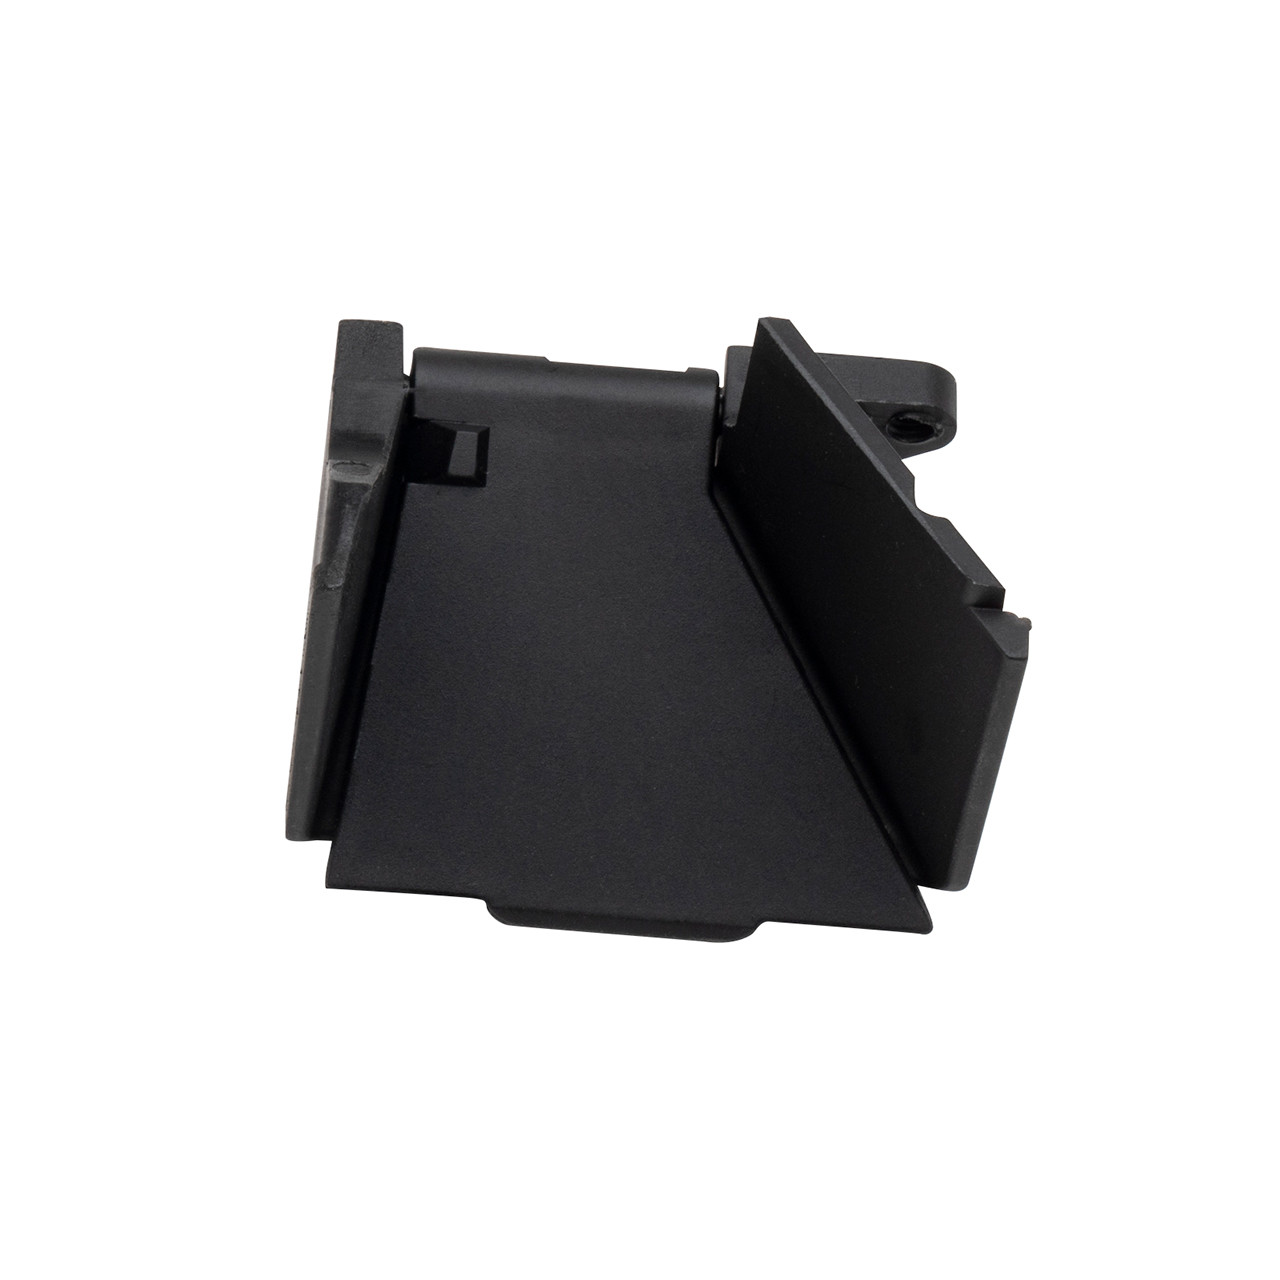 Shop KRISS Vector Ejection Port Assembly - $ 18 - Krytac.com | For Airsoft Use Only.